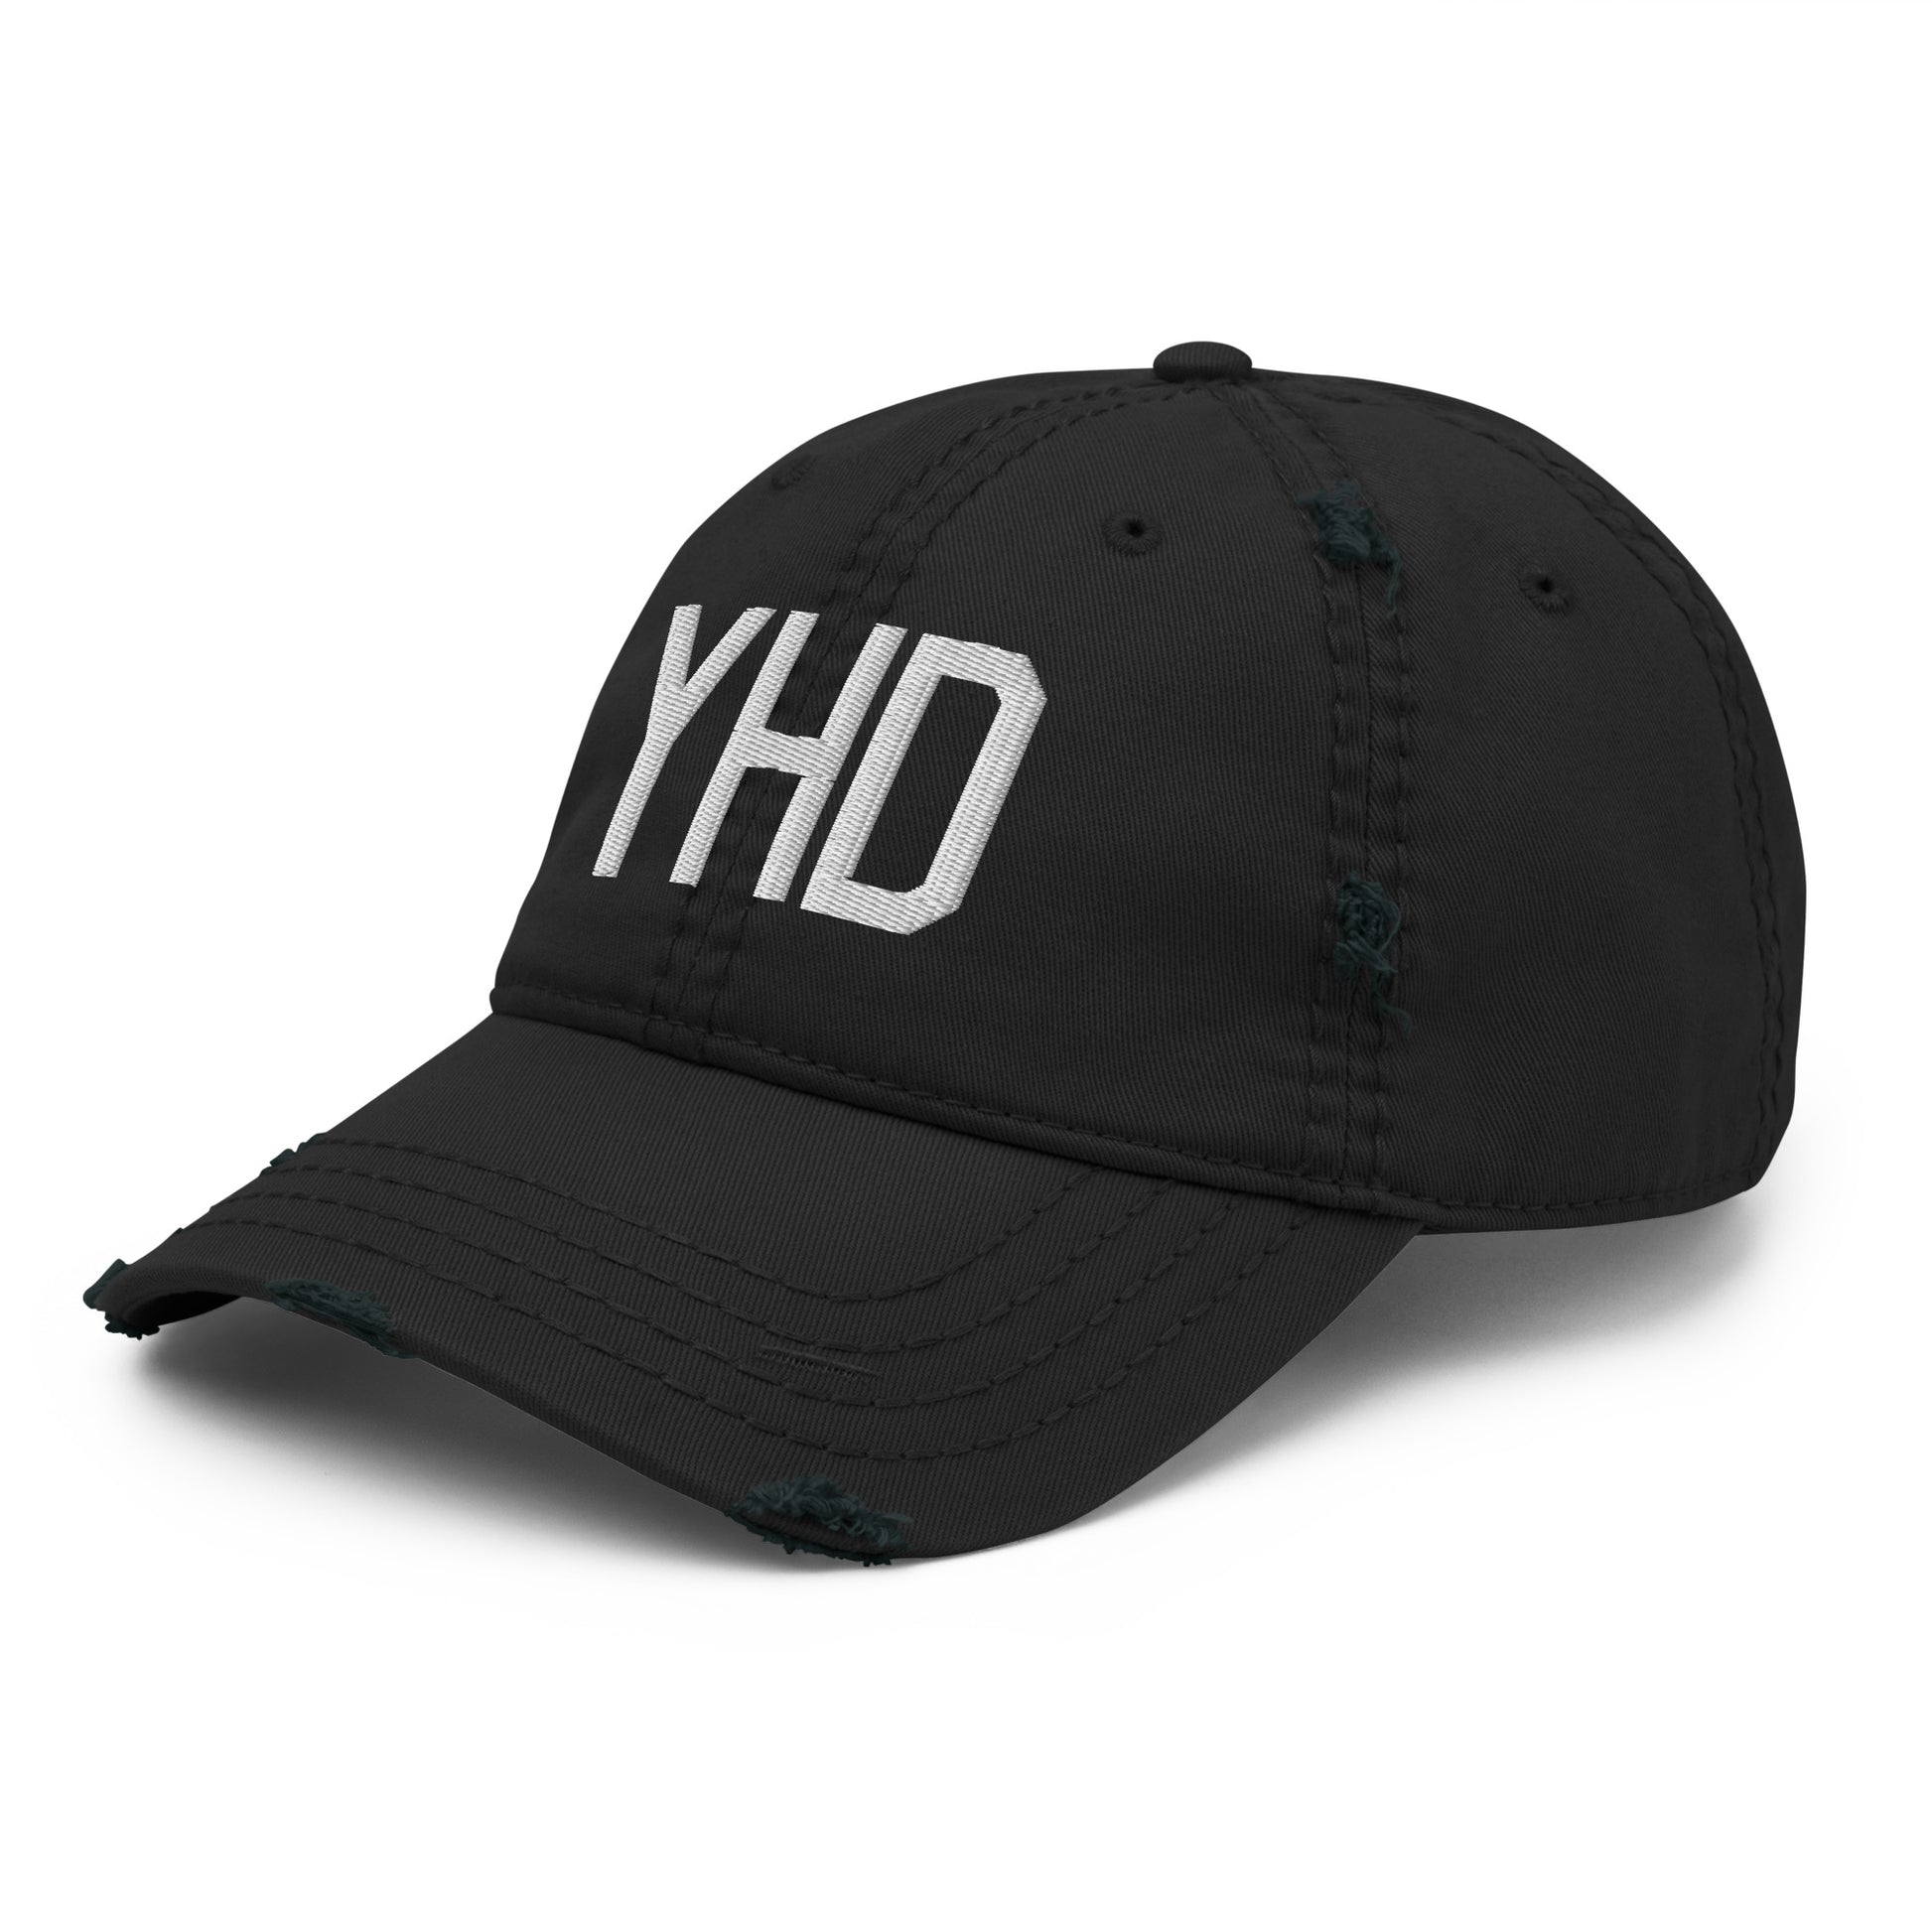 Airport Code Distressed Hat - White • YHD Dryden • YHM Designs - Image 11